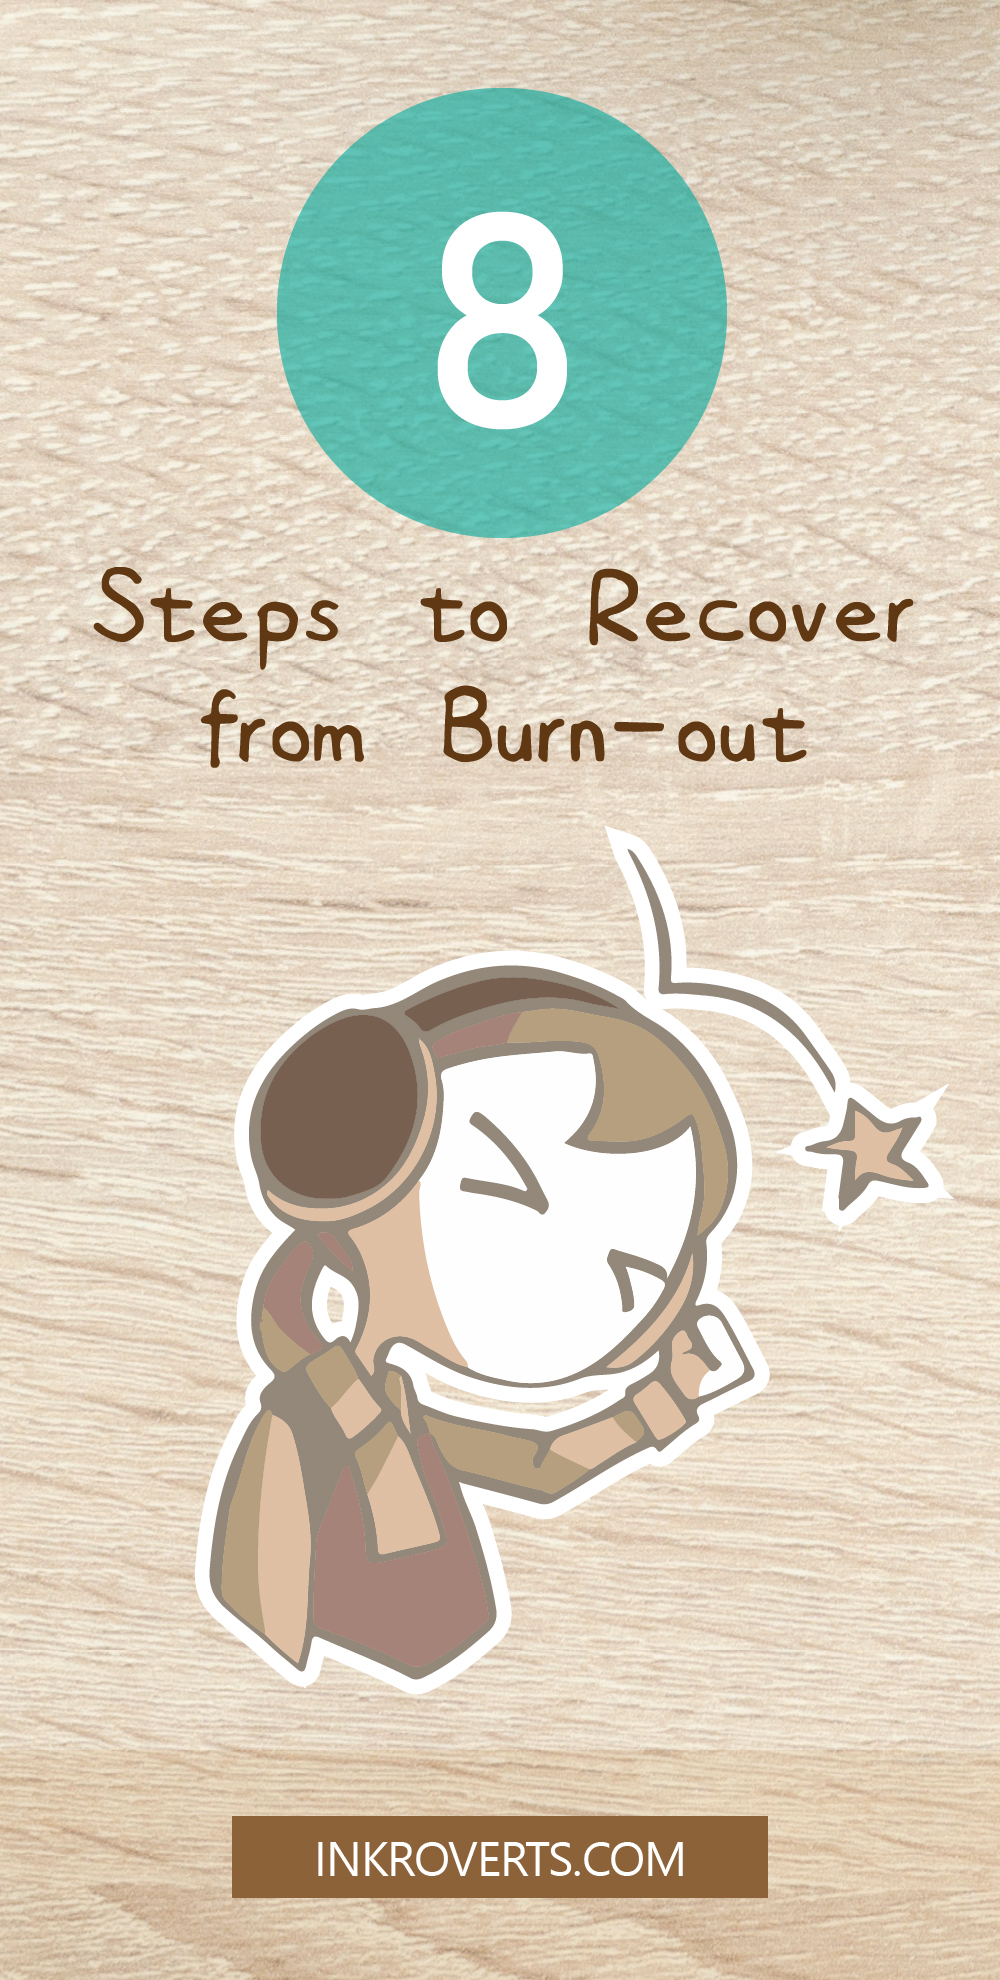 Burnout: 20 Signs You’re Burning Out and How to Recover